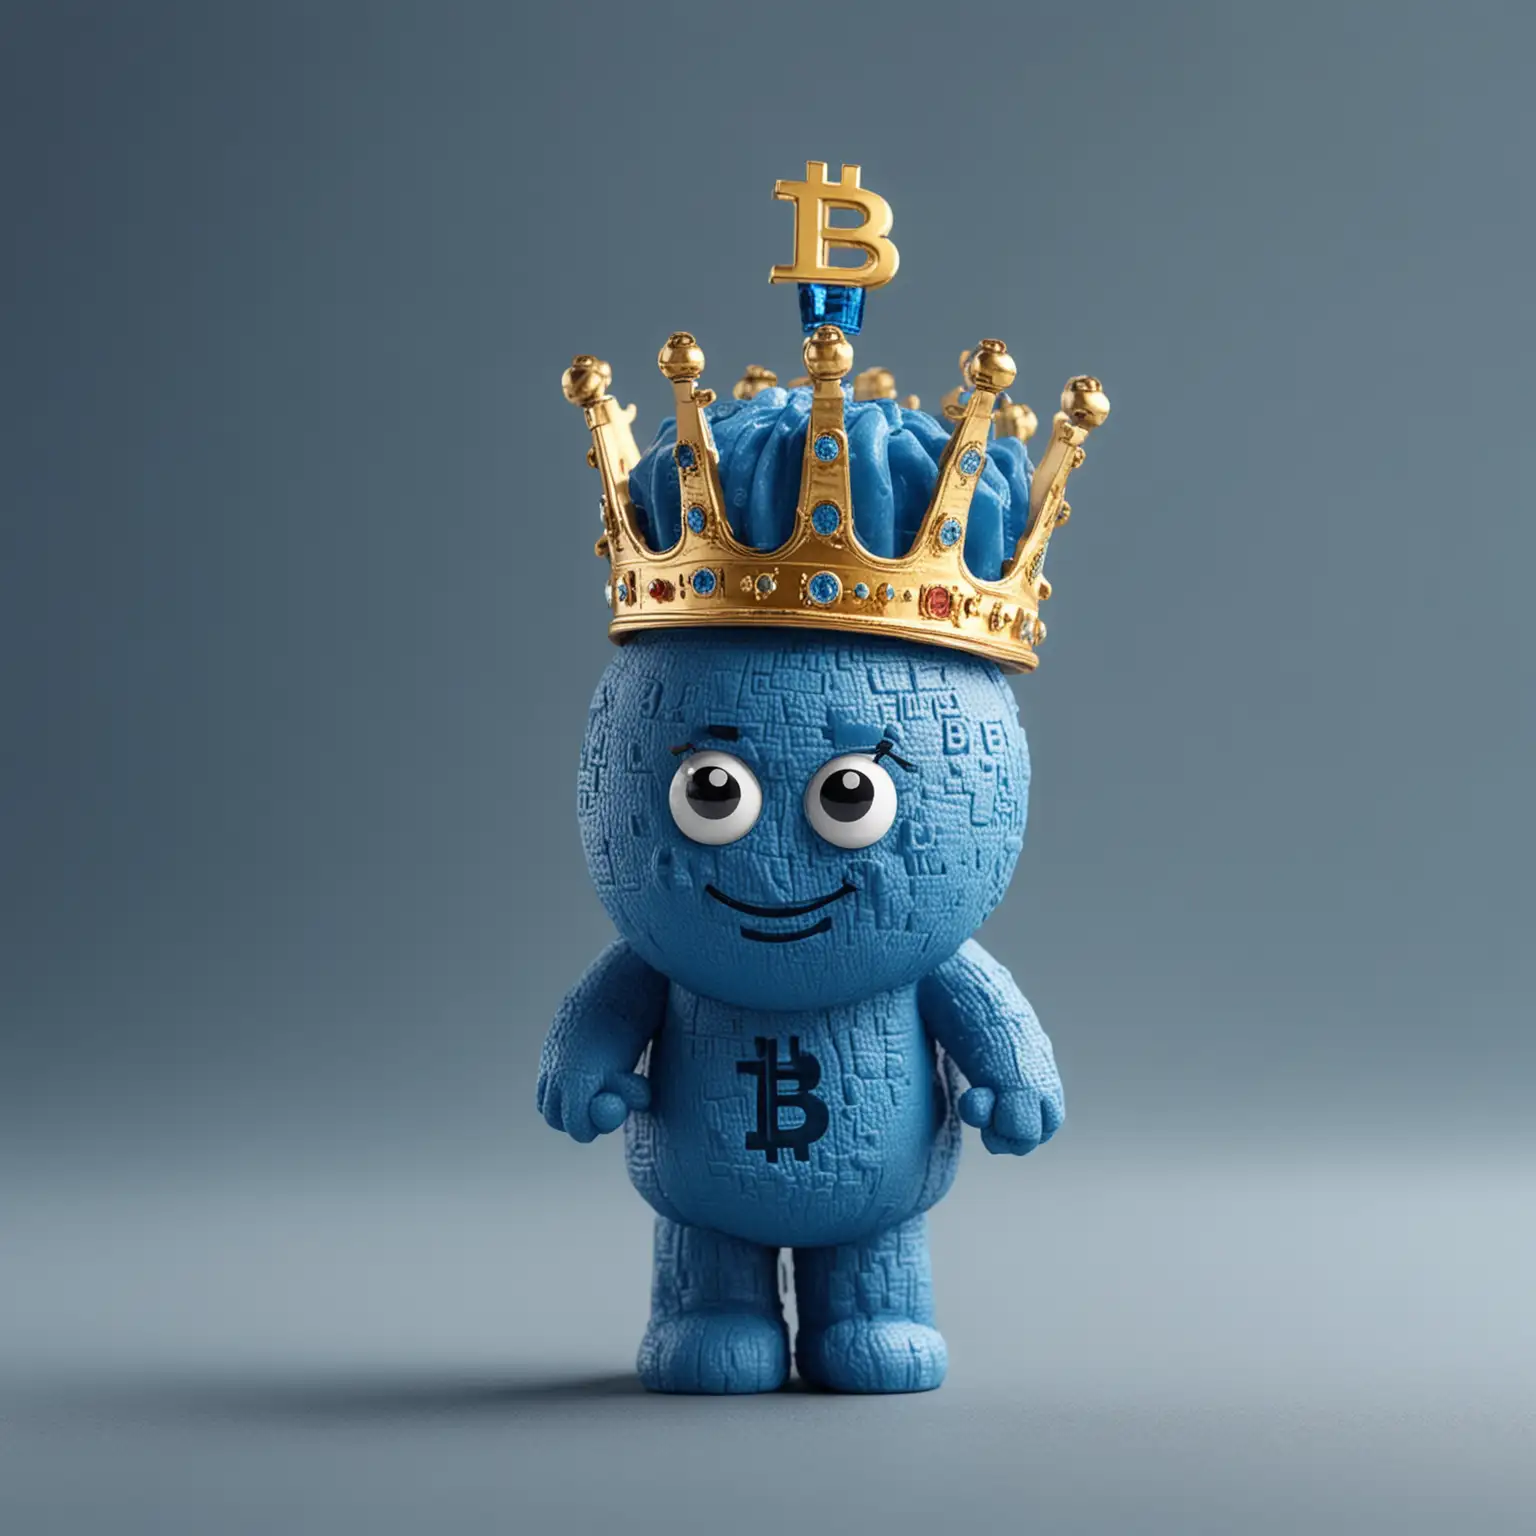 Regal Blue Bitcoin Figure with Crown on Head